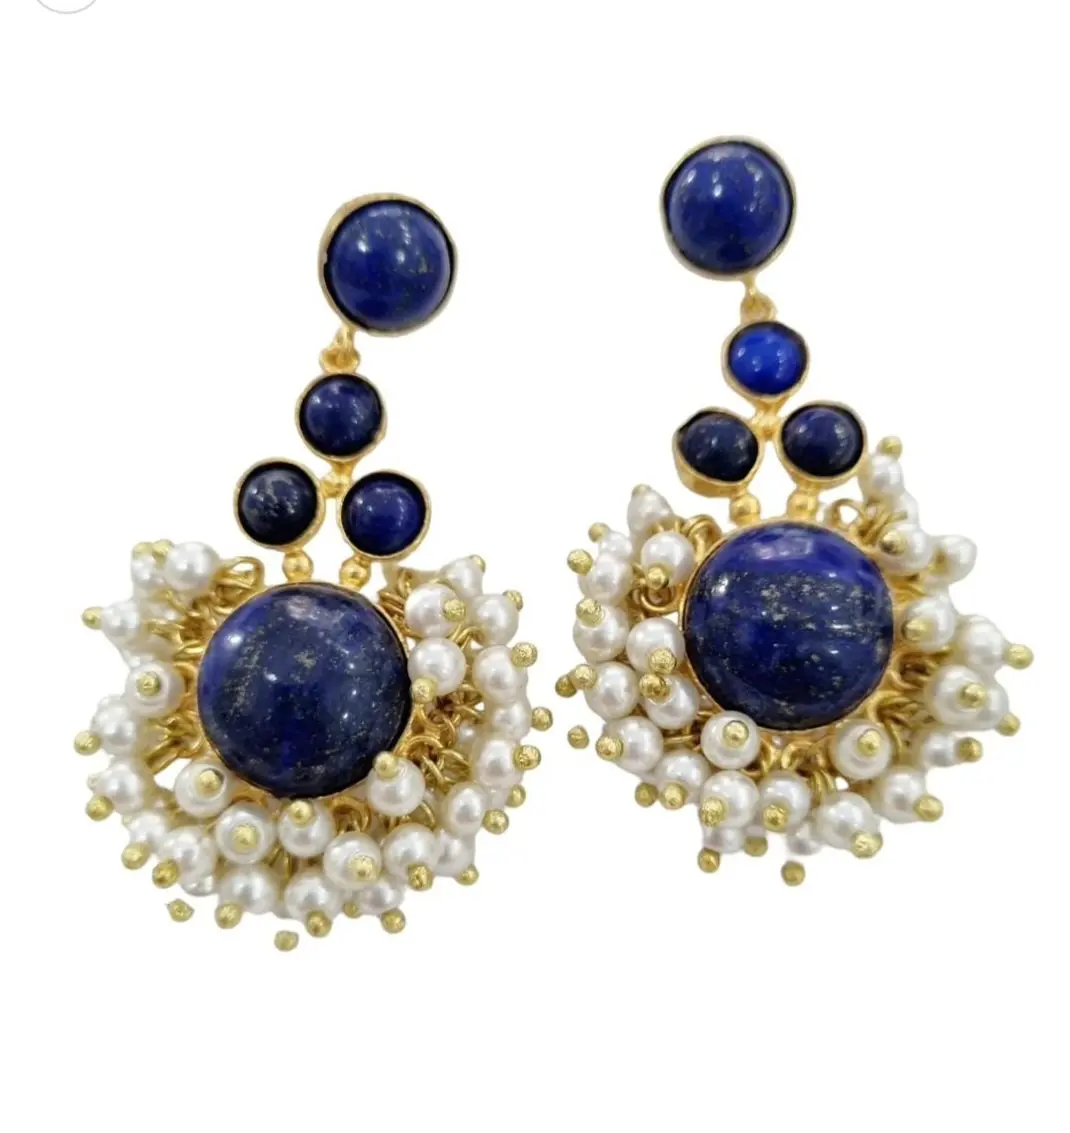 Earrings in lapis lazuli and Mallorca pearls with brass, length 6 cm, weight 17.6gr